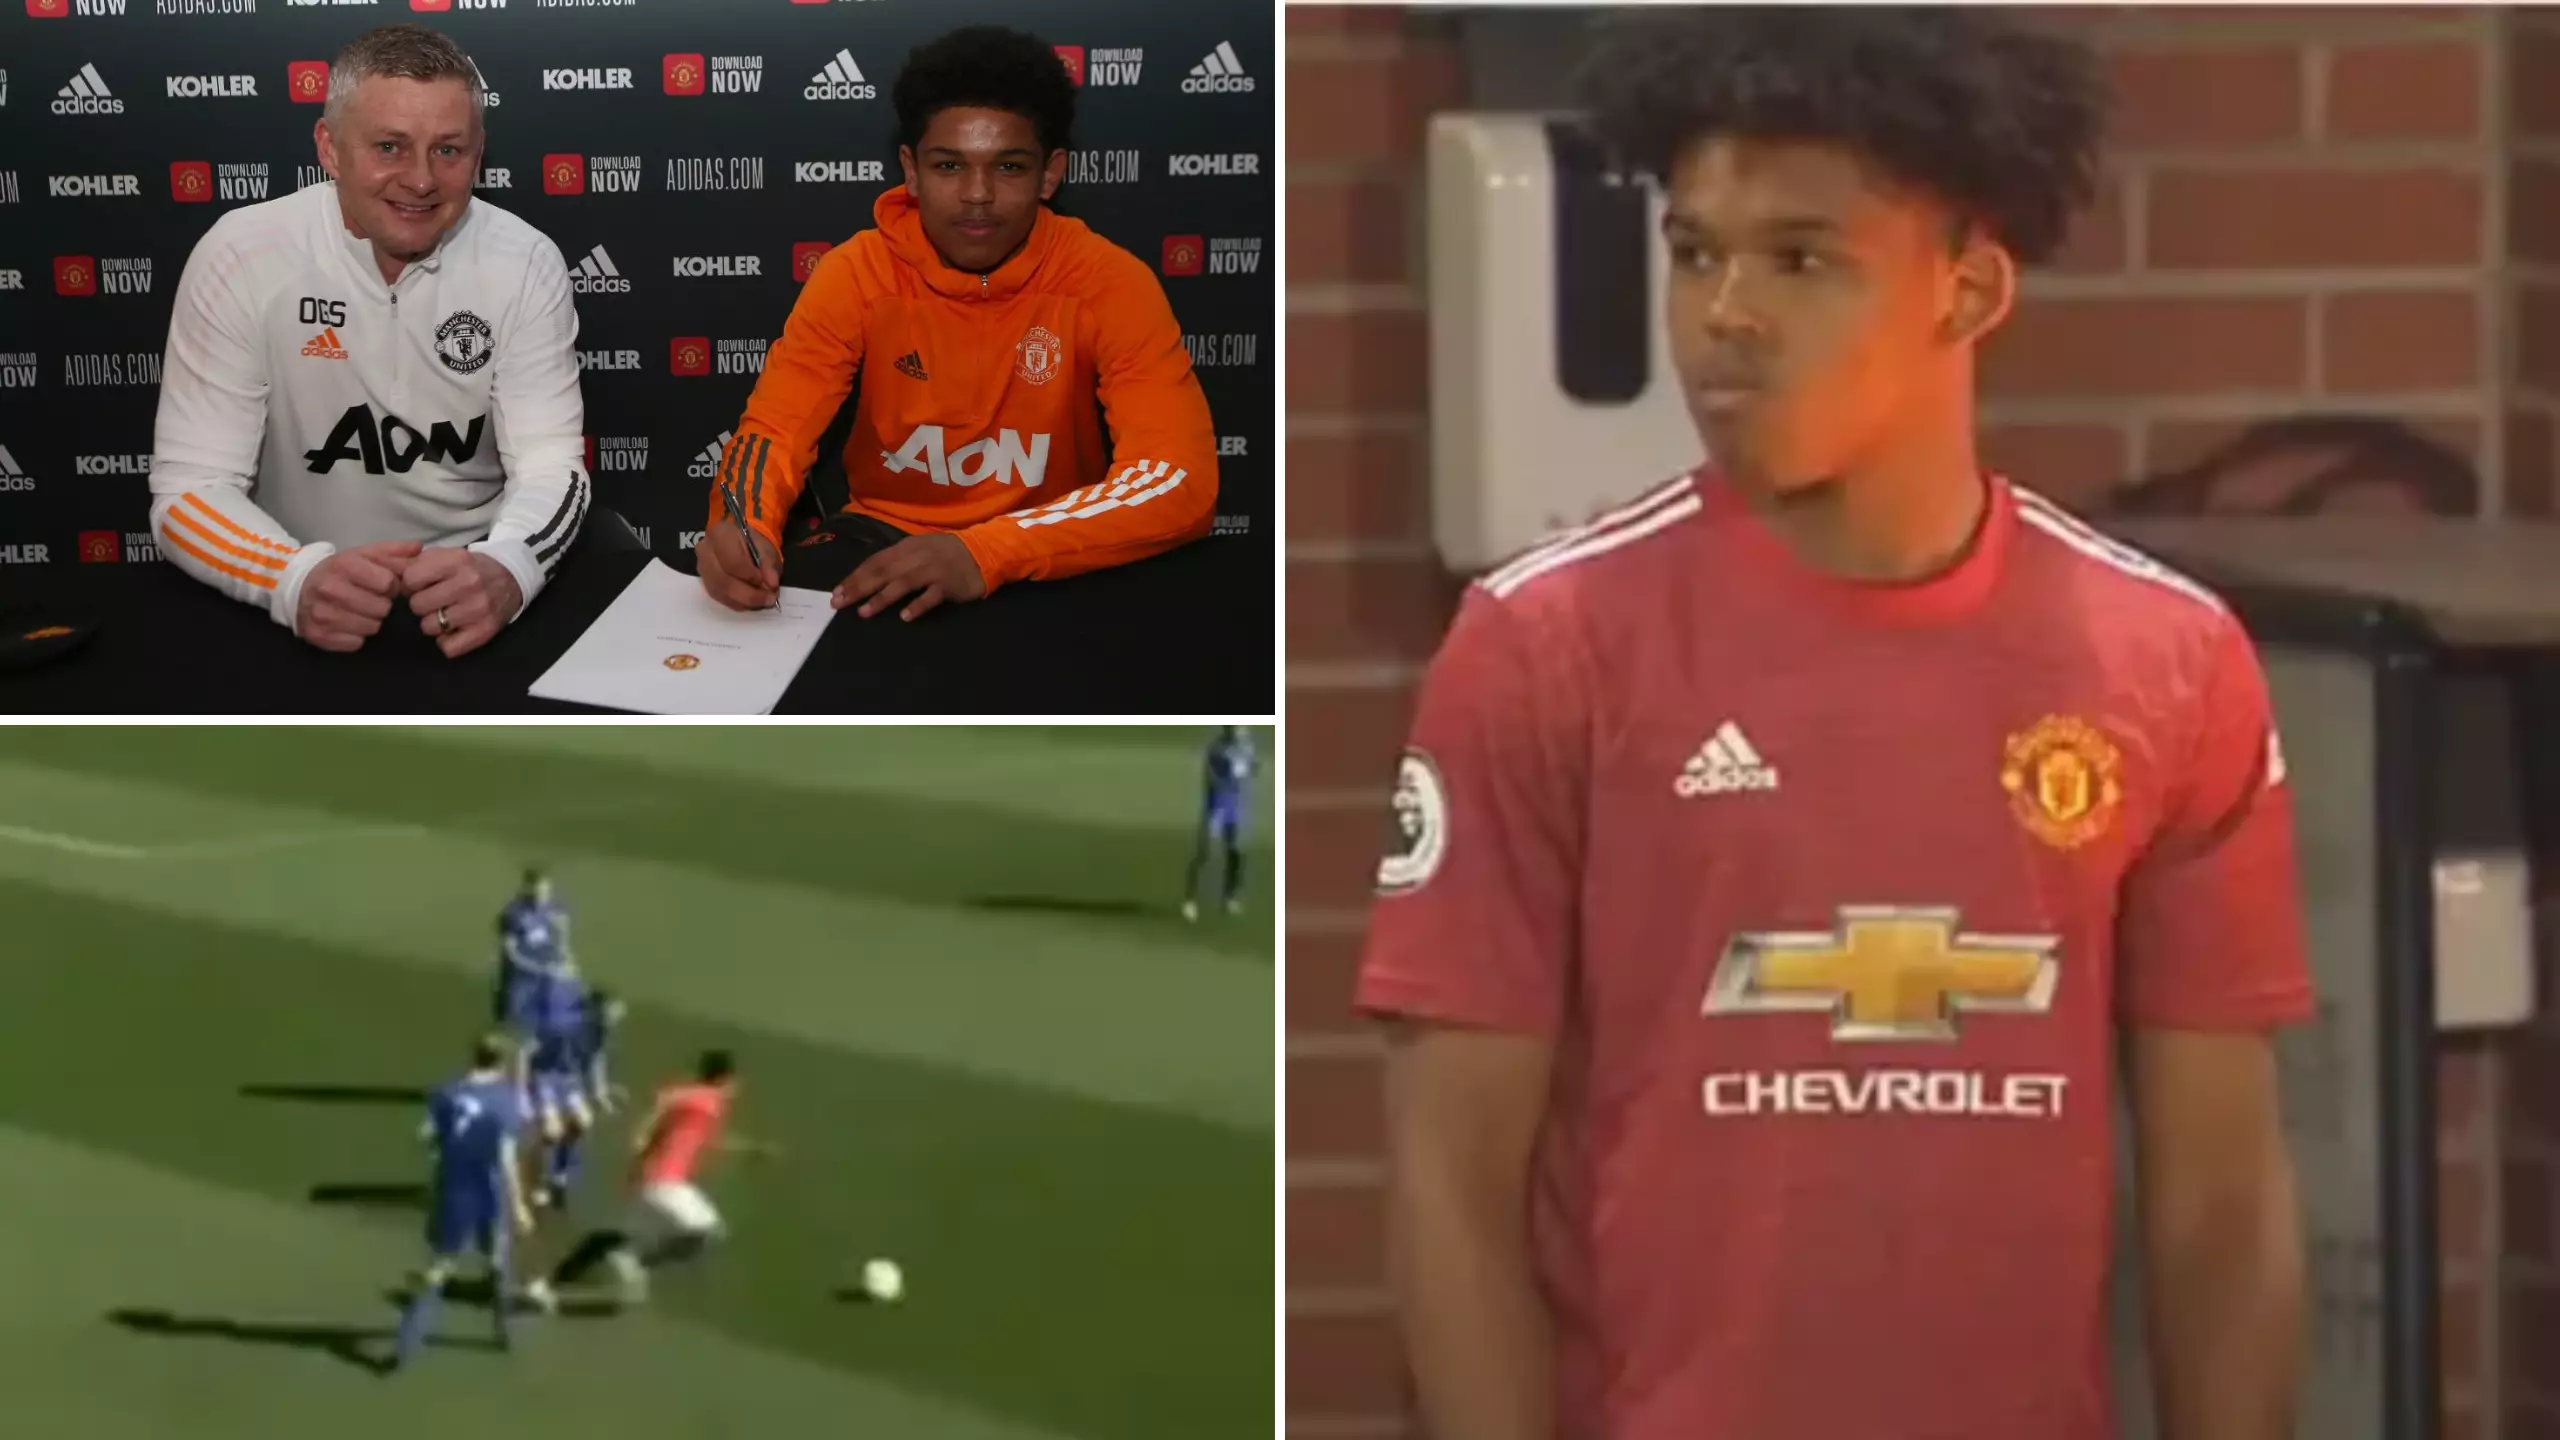 Meet Shola Shoretire - Manchester United's 17-Year-Old Sensation Destined For The Top